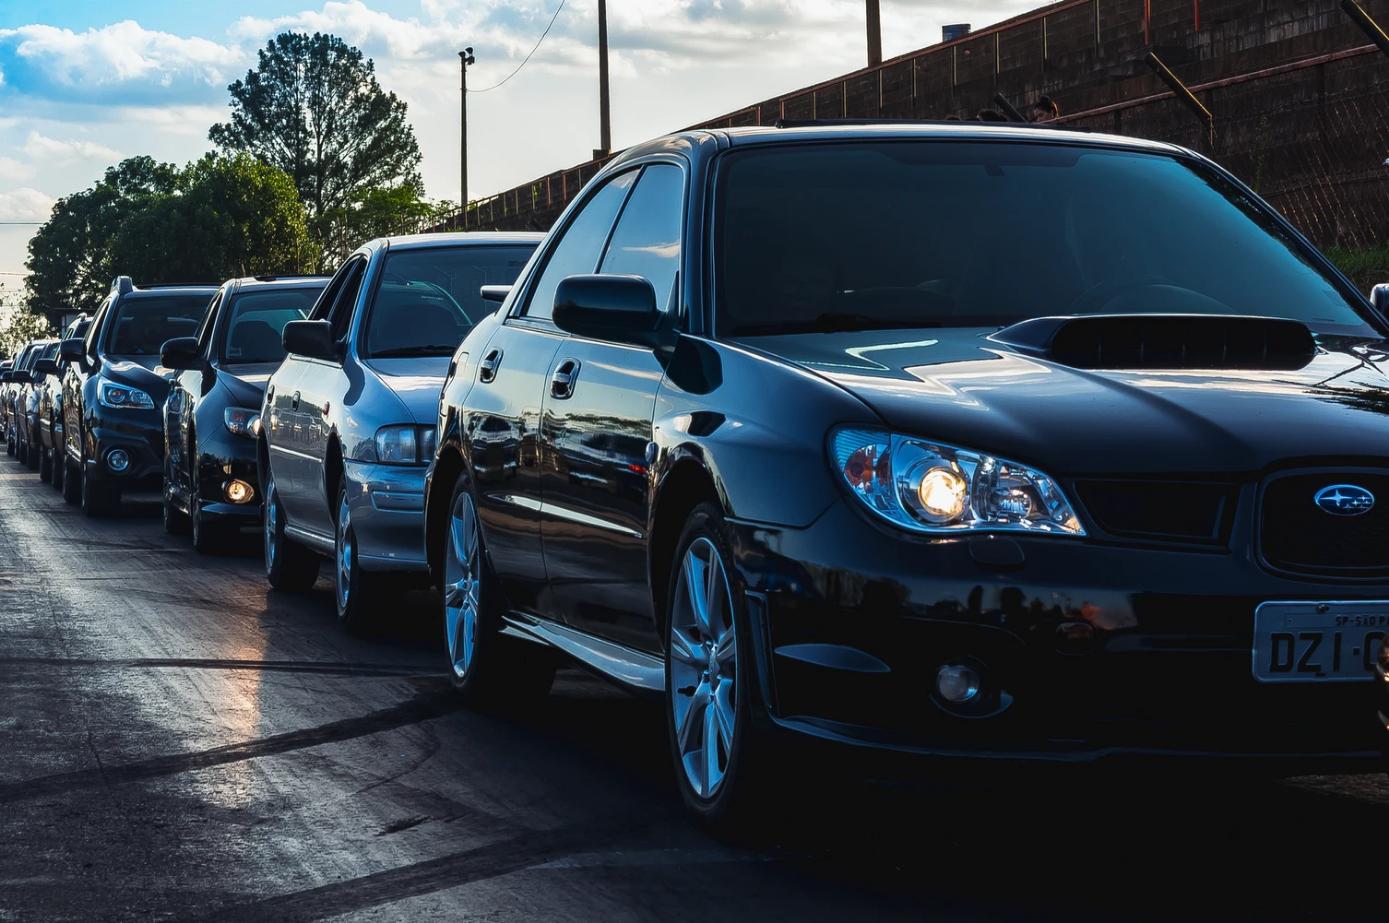 A Fleet Of Top-Tier Vehicles For Luxurious Airport Transfers